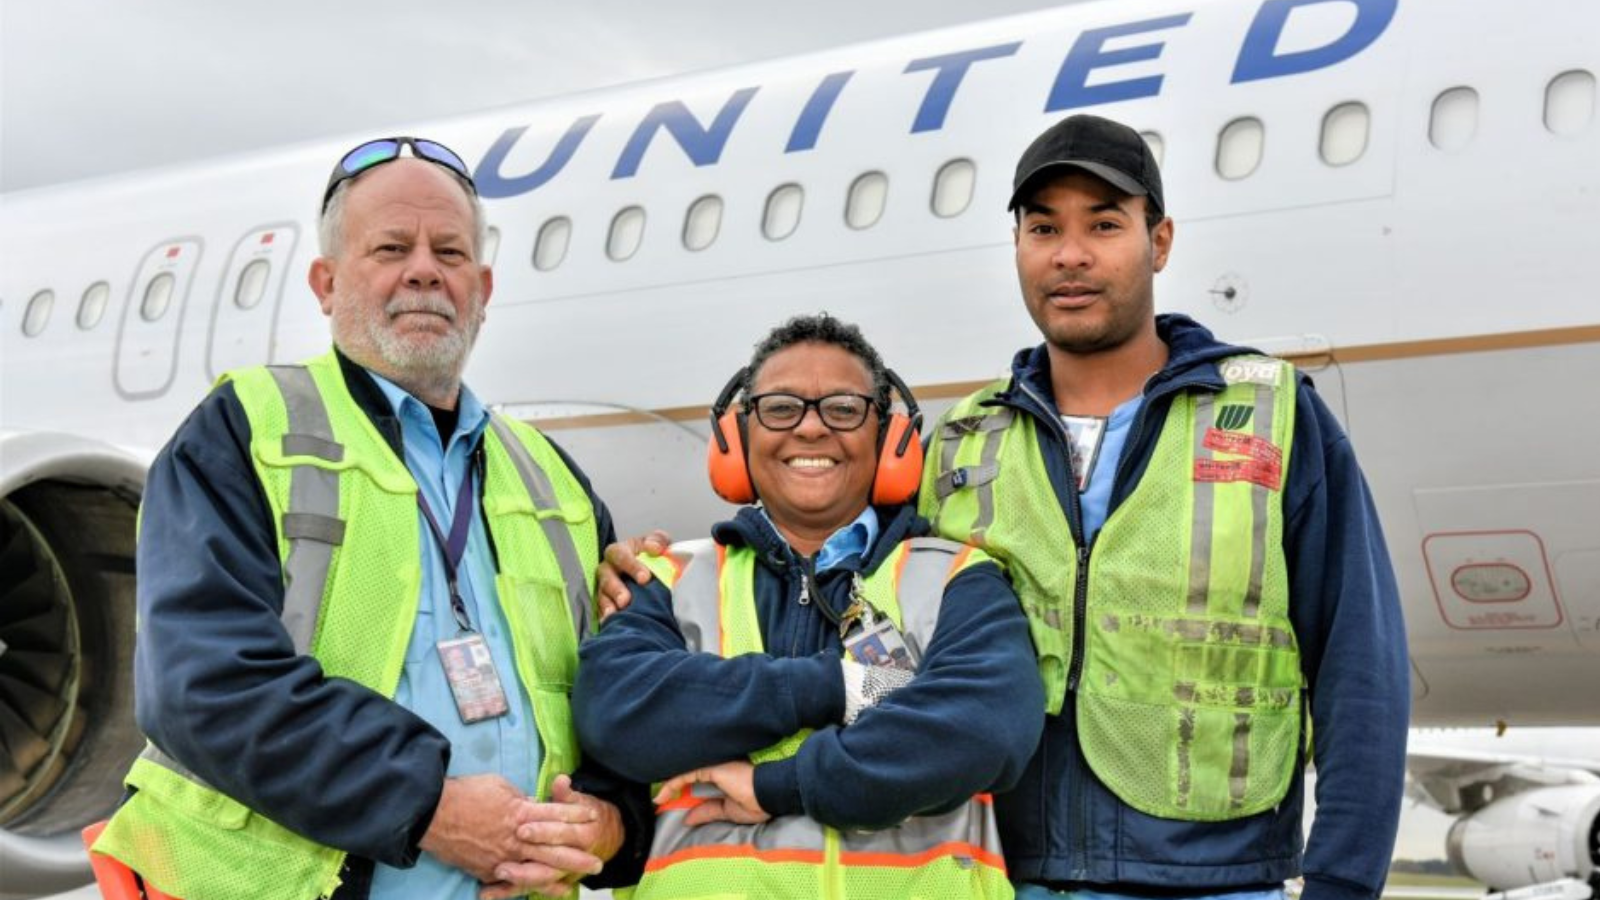 Machinists Union Reaches Agreements in Principle for Top-of-Industry Wages, Stronger Job Protections for 30,000 Members at United Airlines